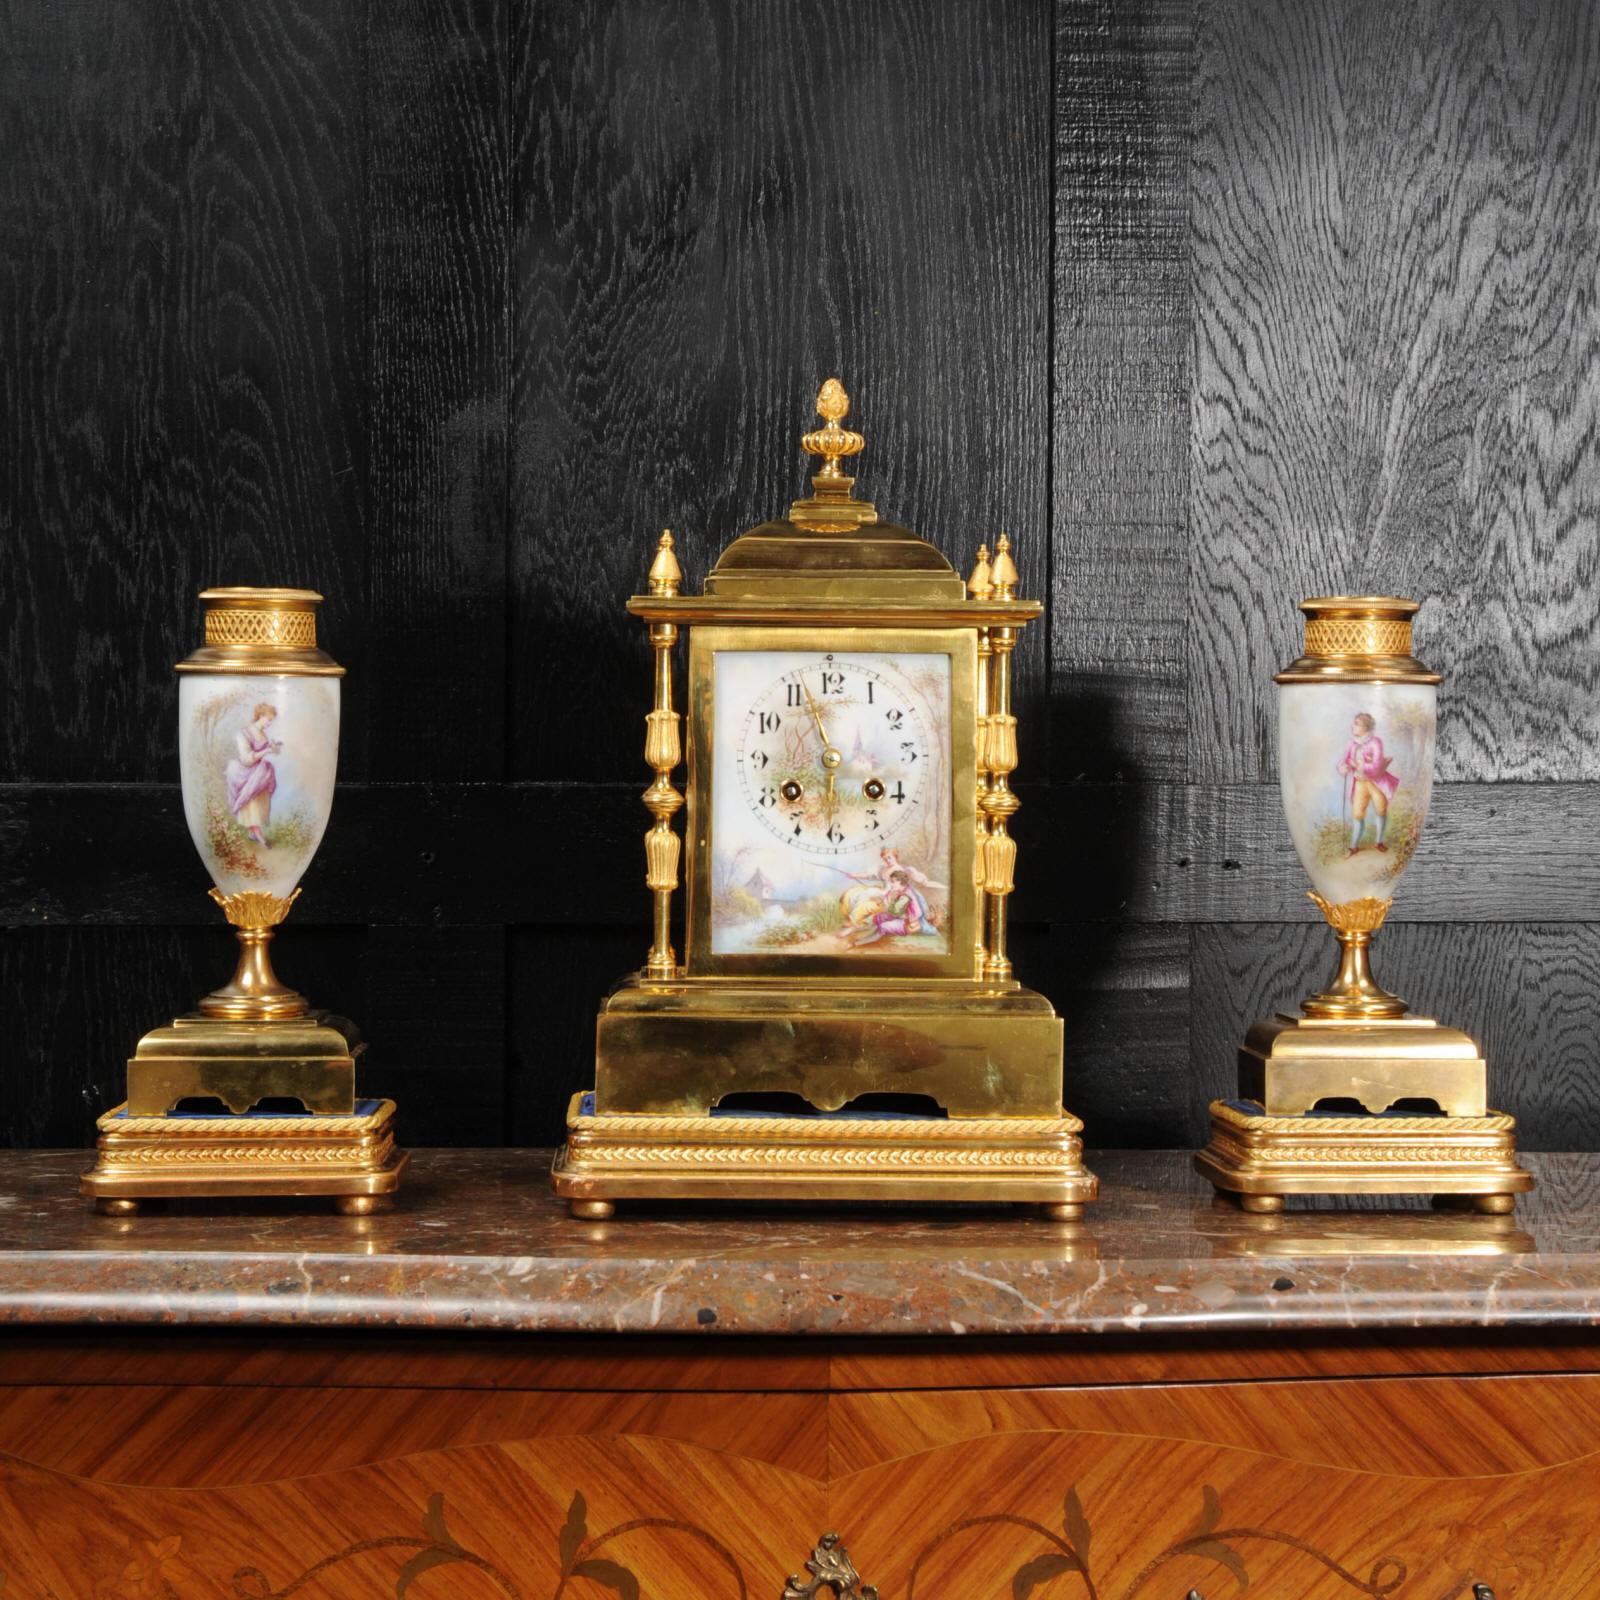 A beautiful classical clock set, of excellent quality in ormolu (finely gilded bronze) and delicately painted porcelain. The dial is finely painted with a scene of a young couple seated by a river in a country setting. The side urns also show the